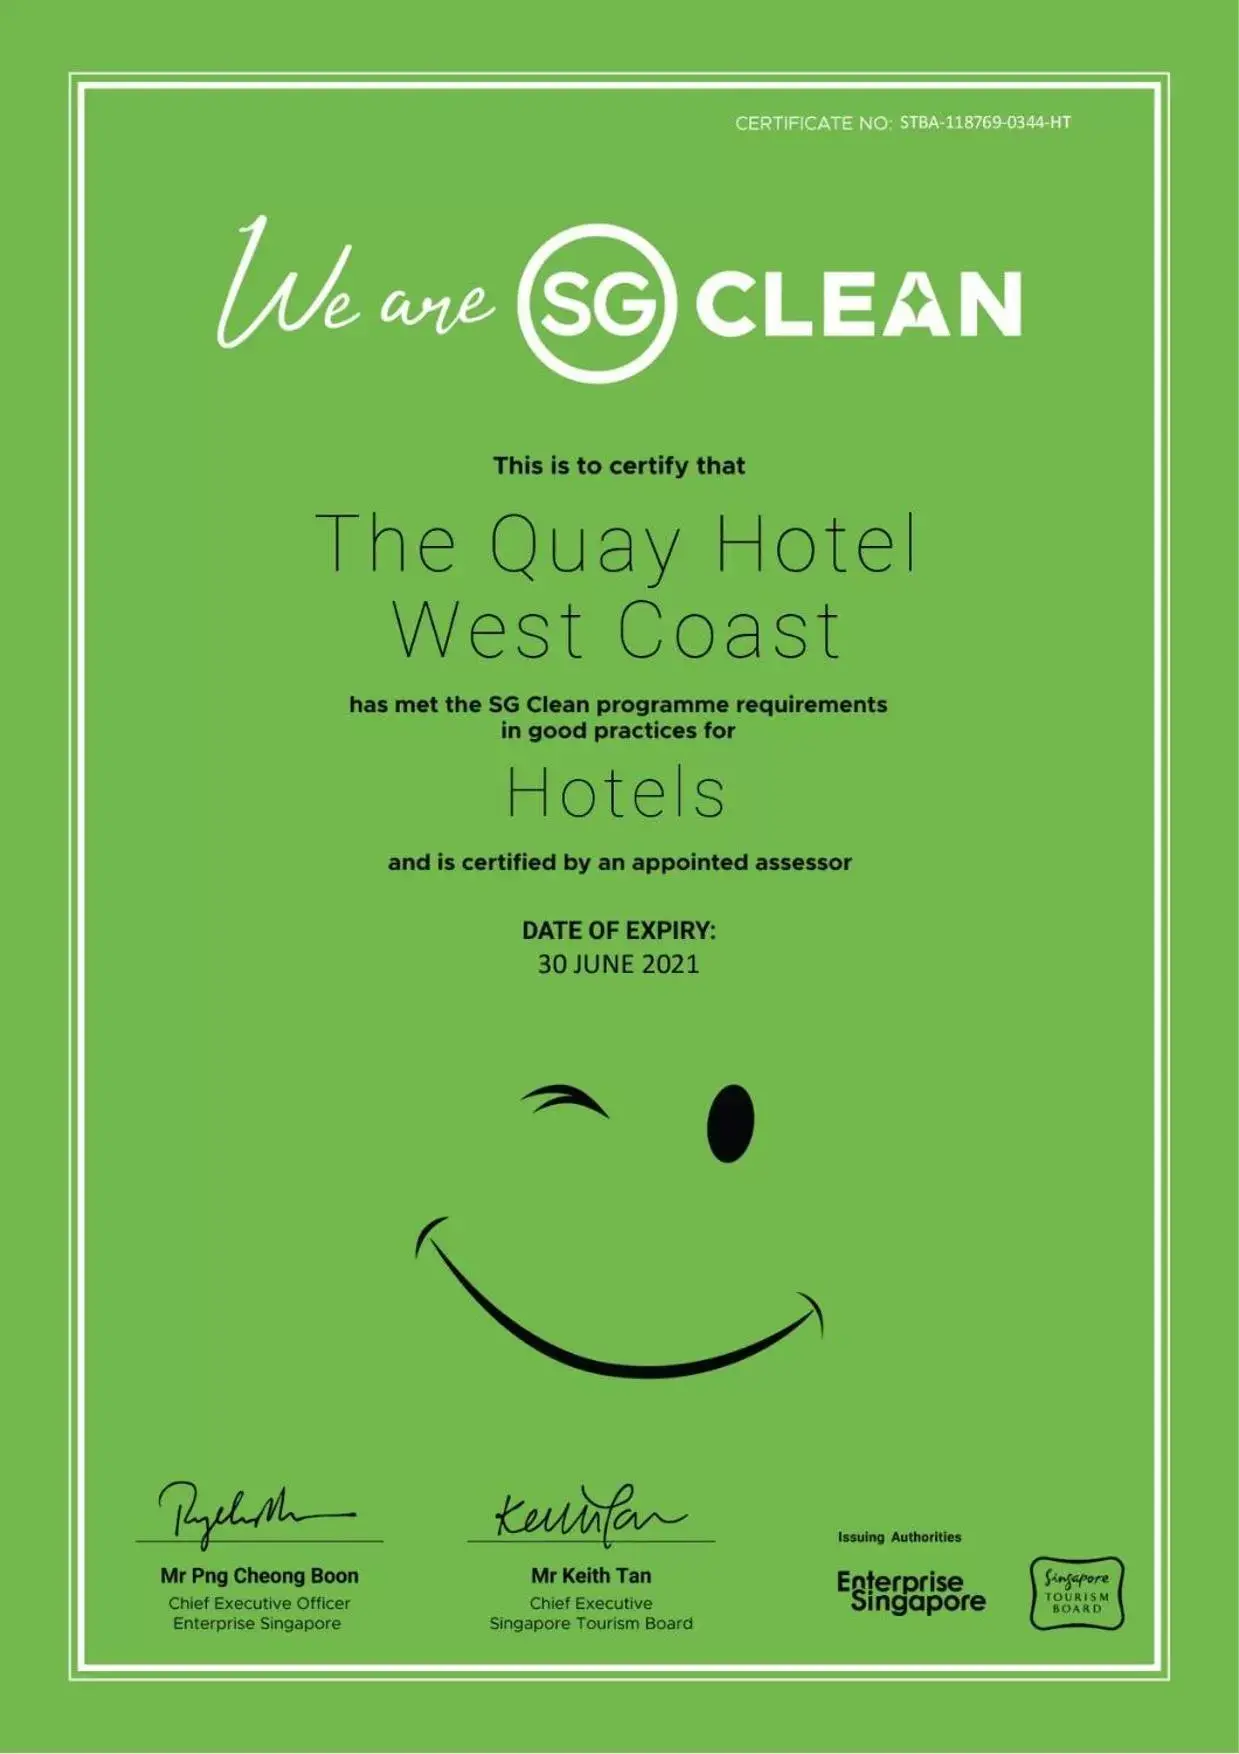 Logo/Certificate/Sign in The Quay Hotel West Coast